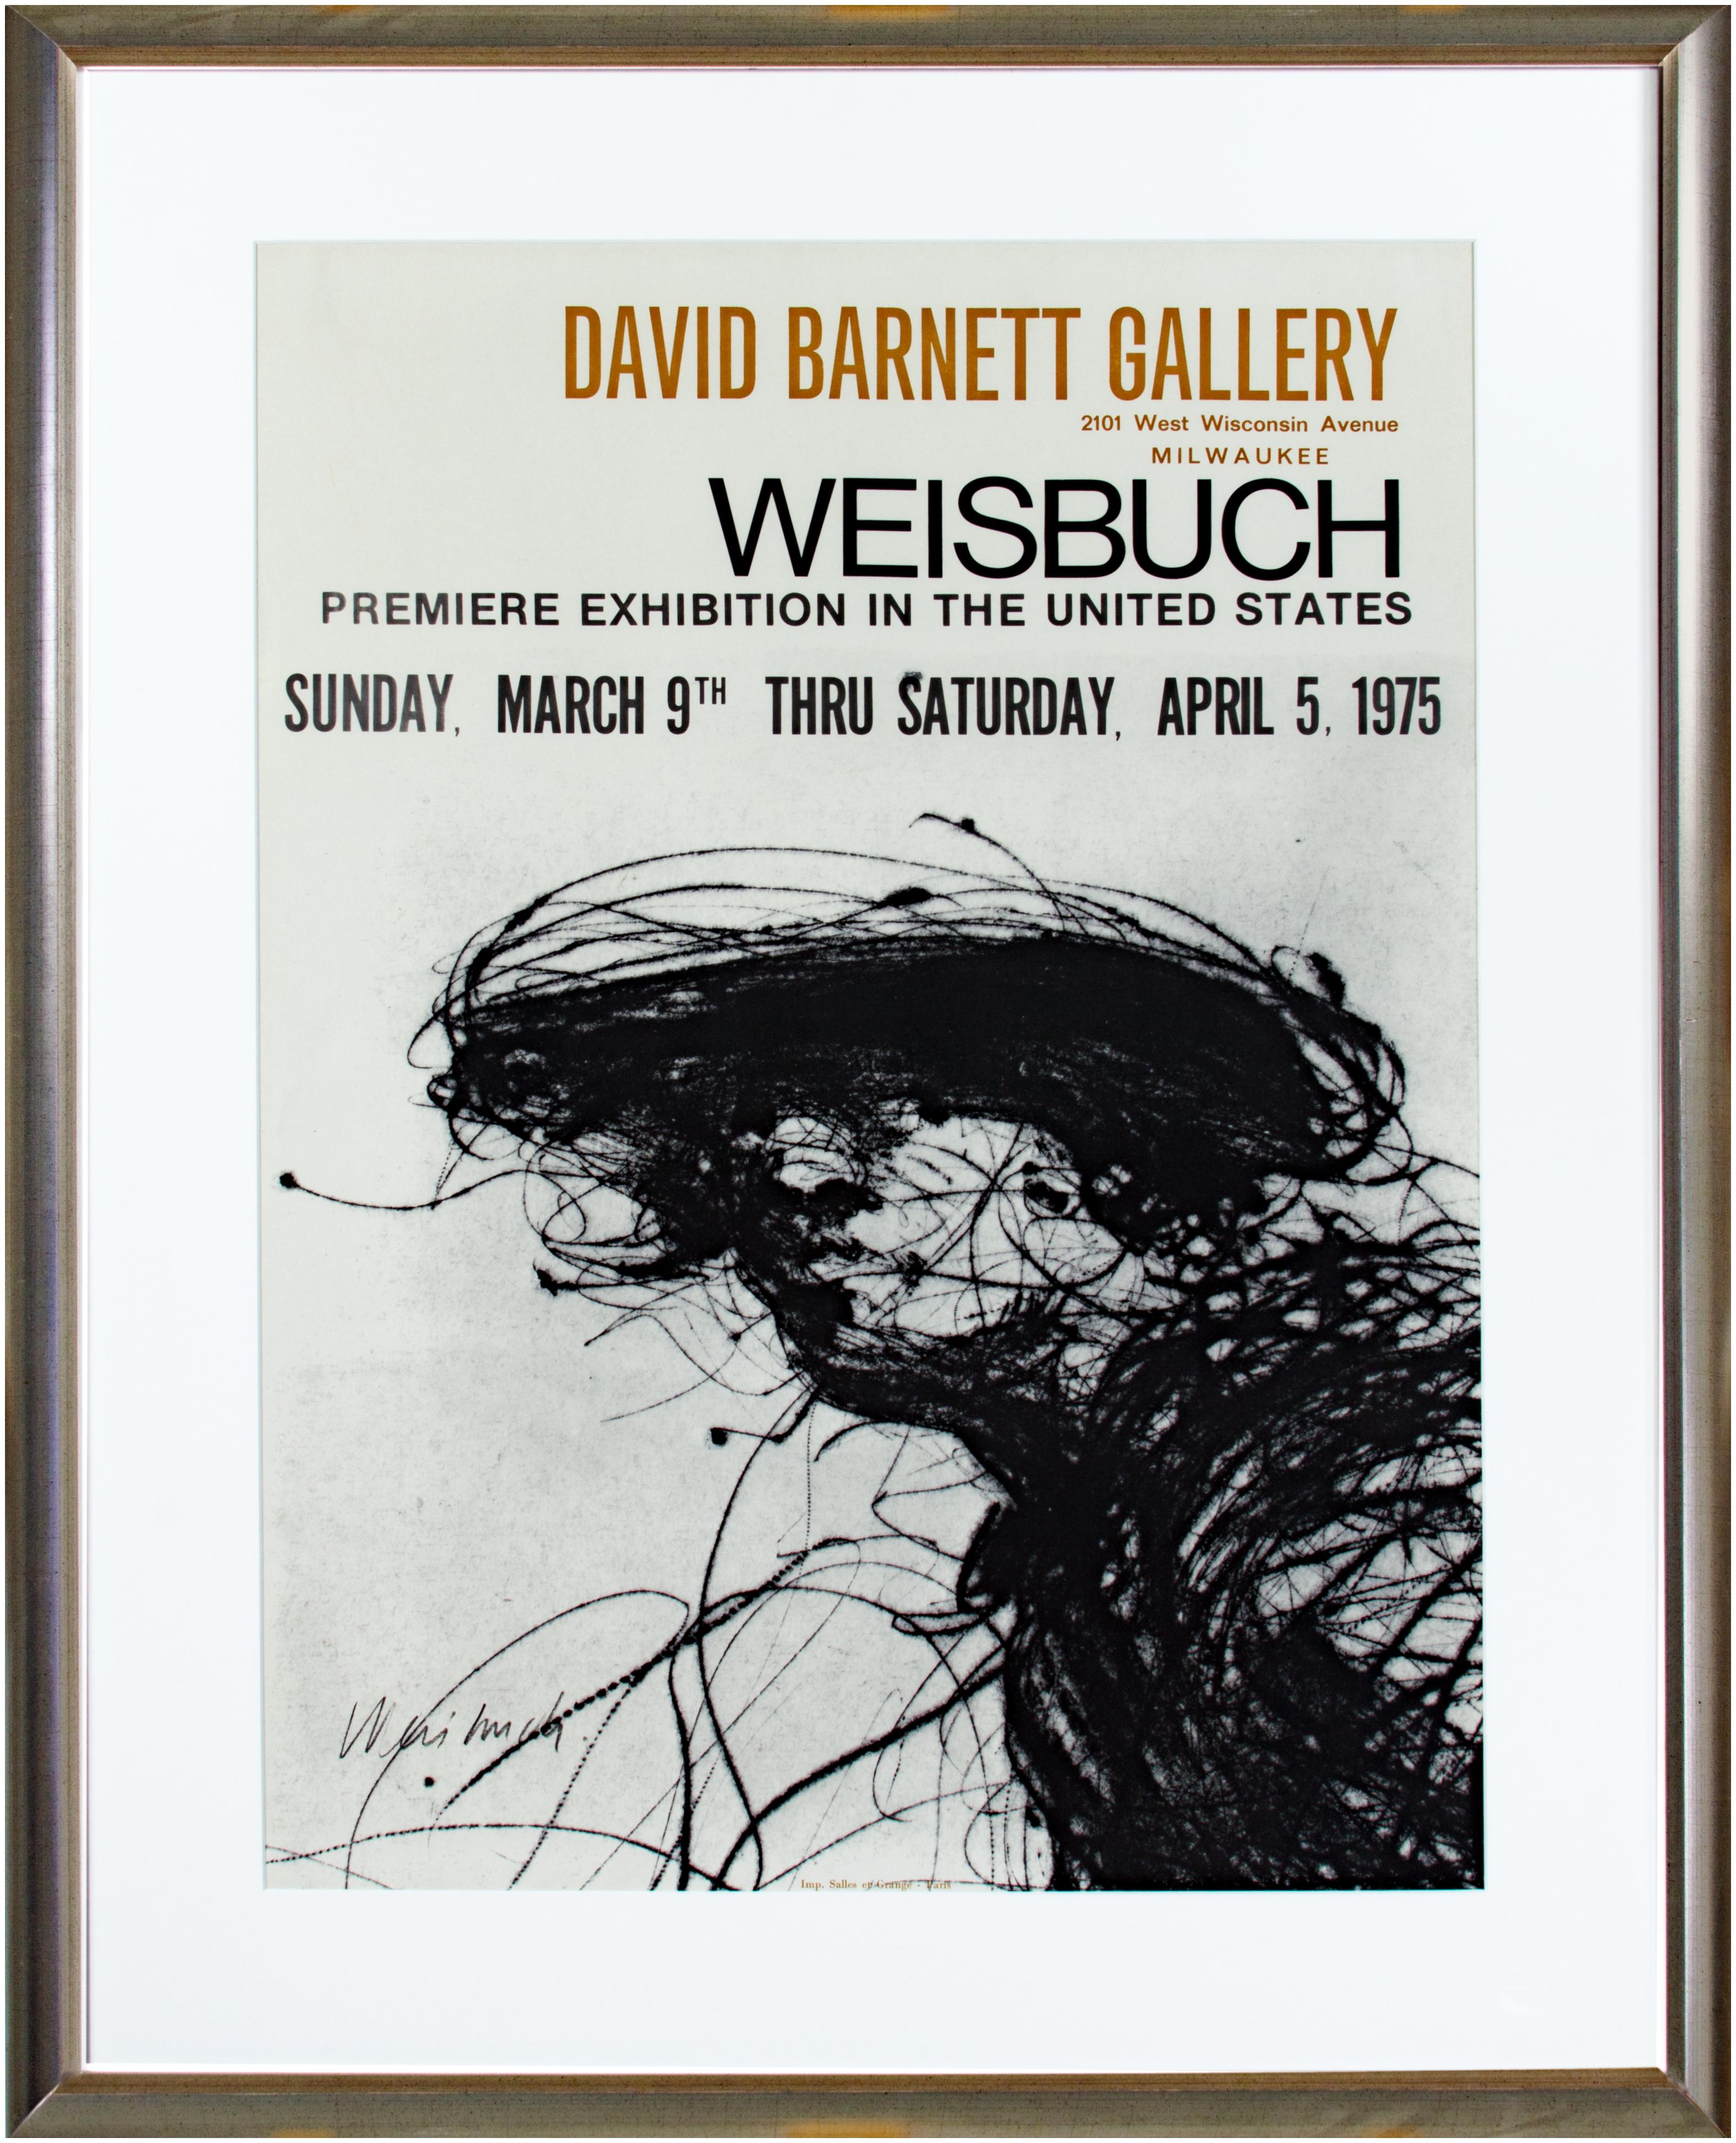 Premiere U.S. Exhibition Poster at David Barnett Gallery, signed by Weisbuch